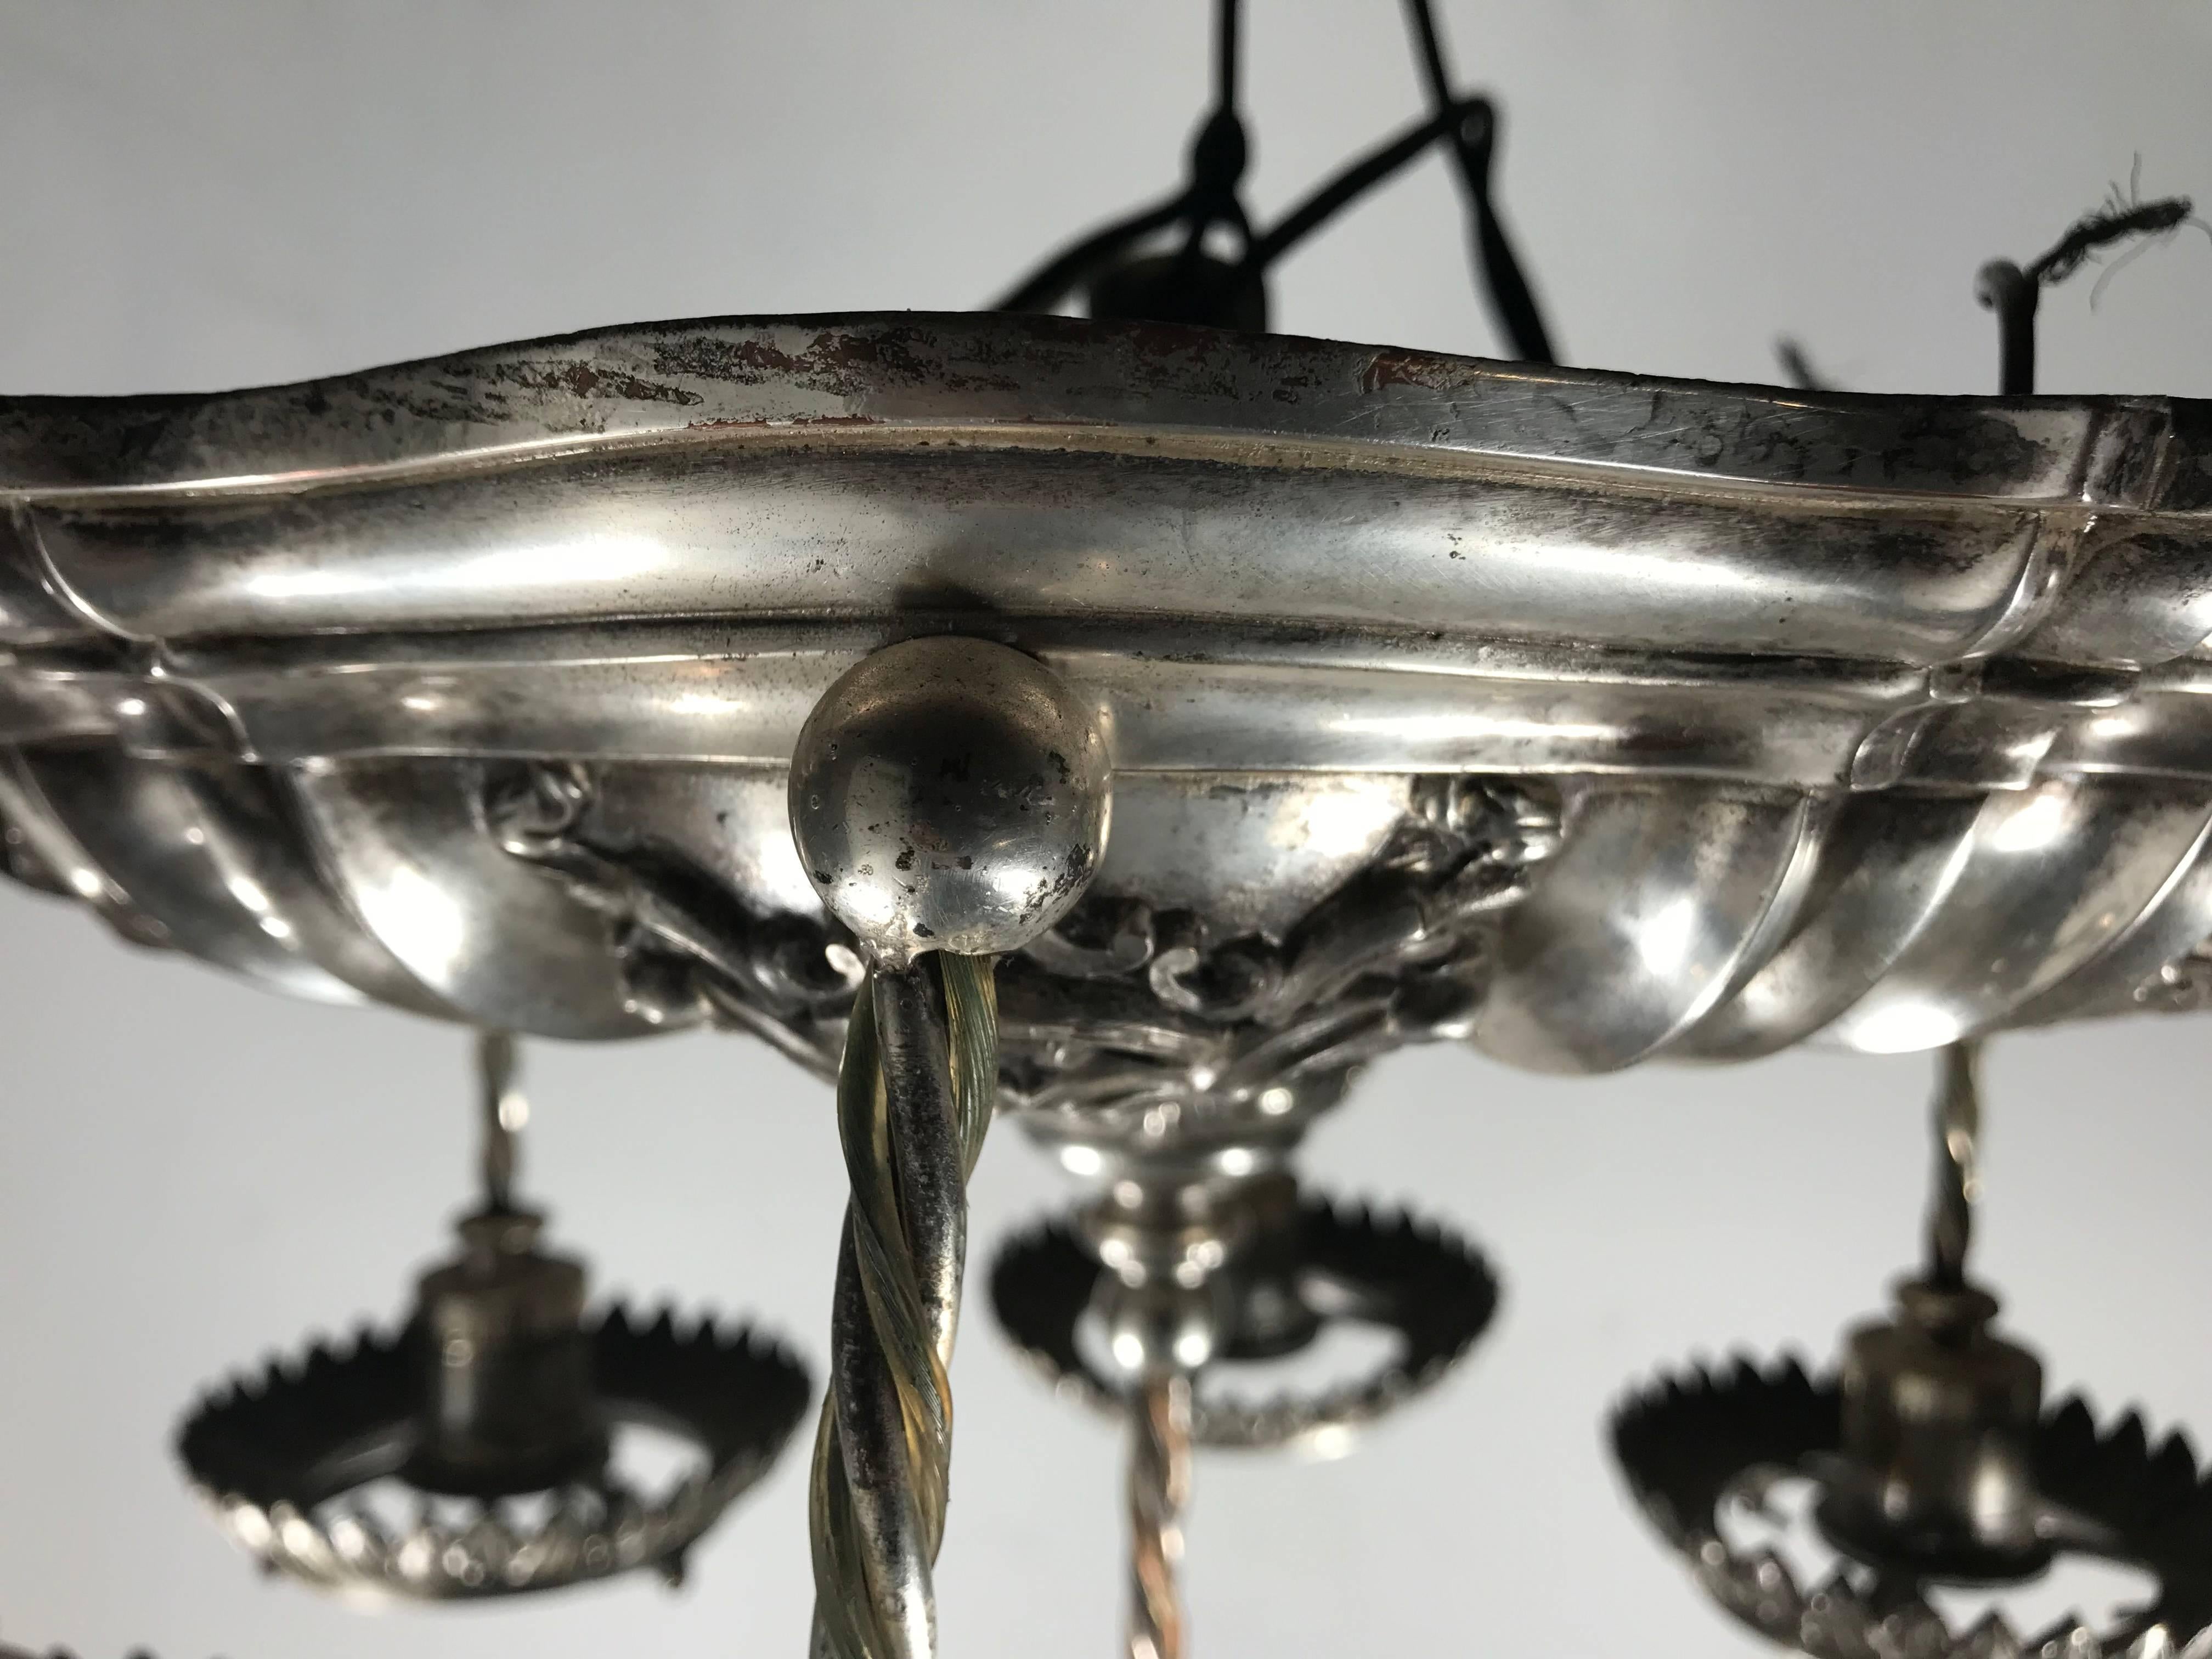 Stunning silver plated neoclassic style pendant chandelier by E.F.Caldwell, circa 1920s

Edward F. Caldwell & Co., of New York City, was one of the premier designers and manufacturers of electric light fixtures and decorative metalwork from the